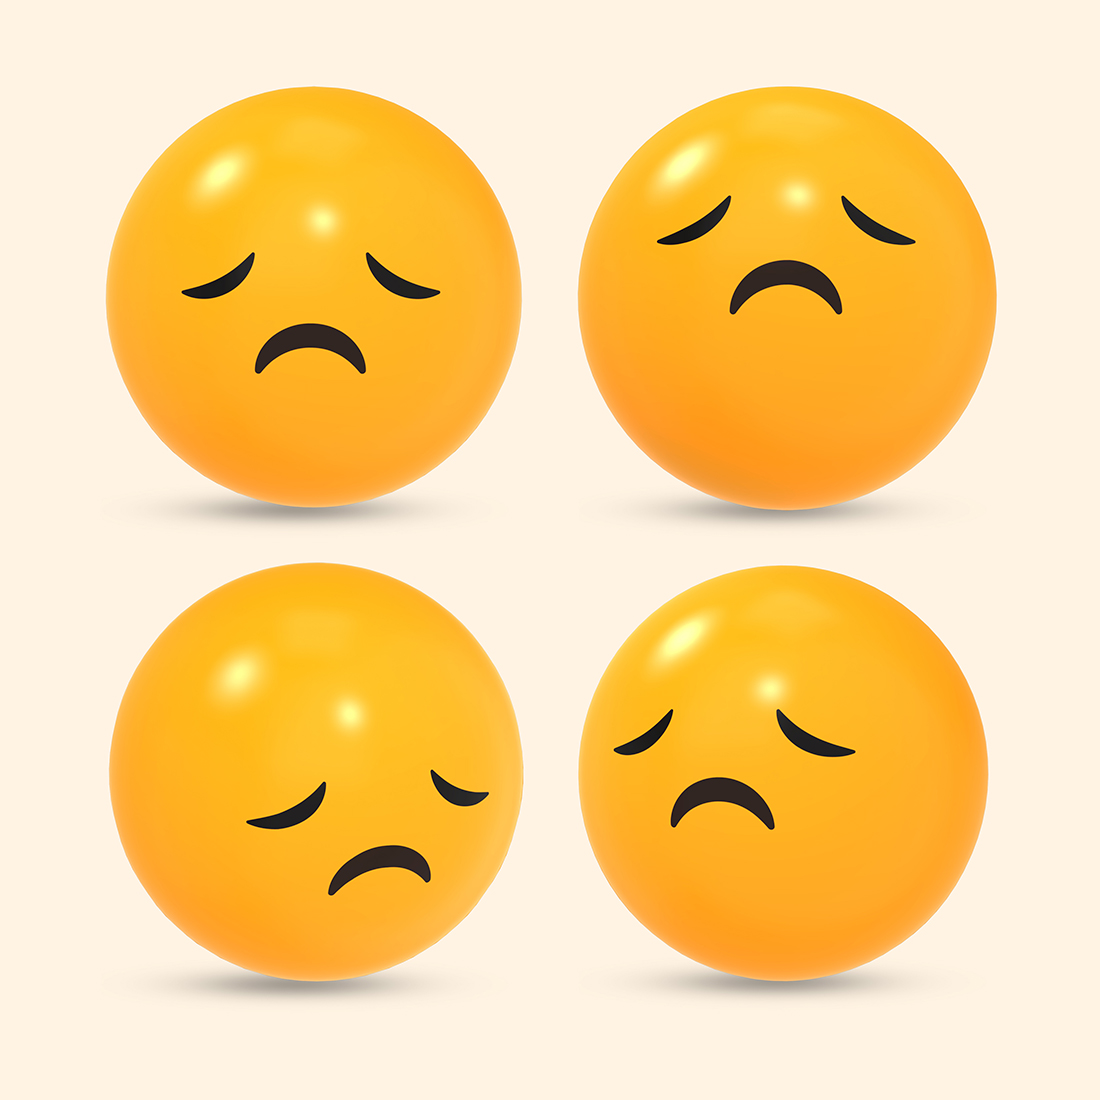 3D rendered social media icon sad unhappy emoji reaction with different view preview image.